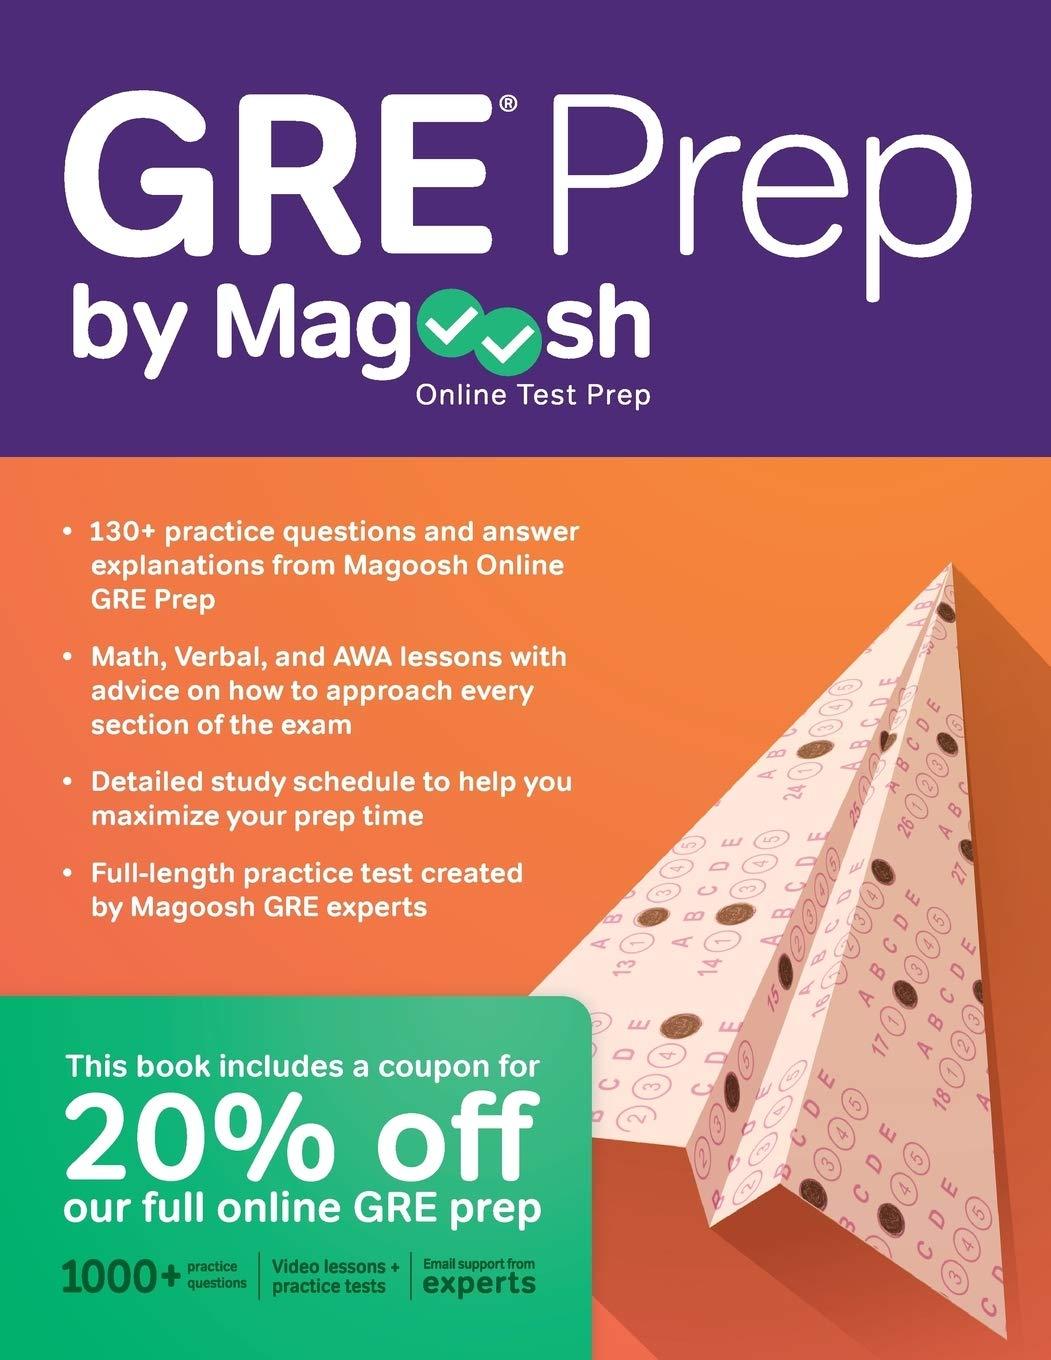 gre prep by magoosh 1st edition magoosh, chris lele, mike mcgarry 1939418917, 978-1939418913